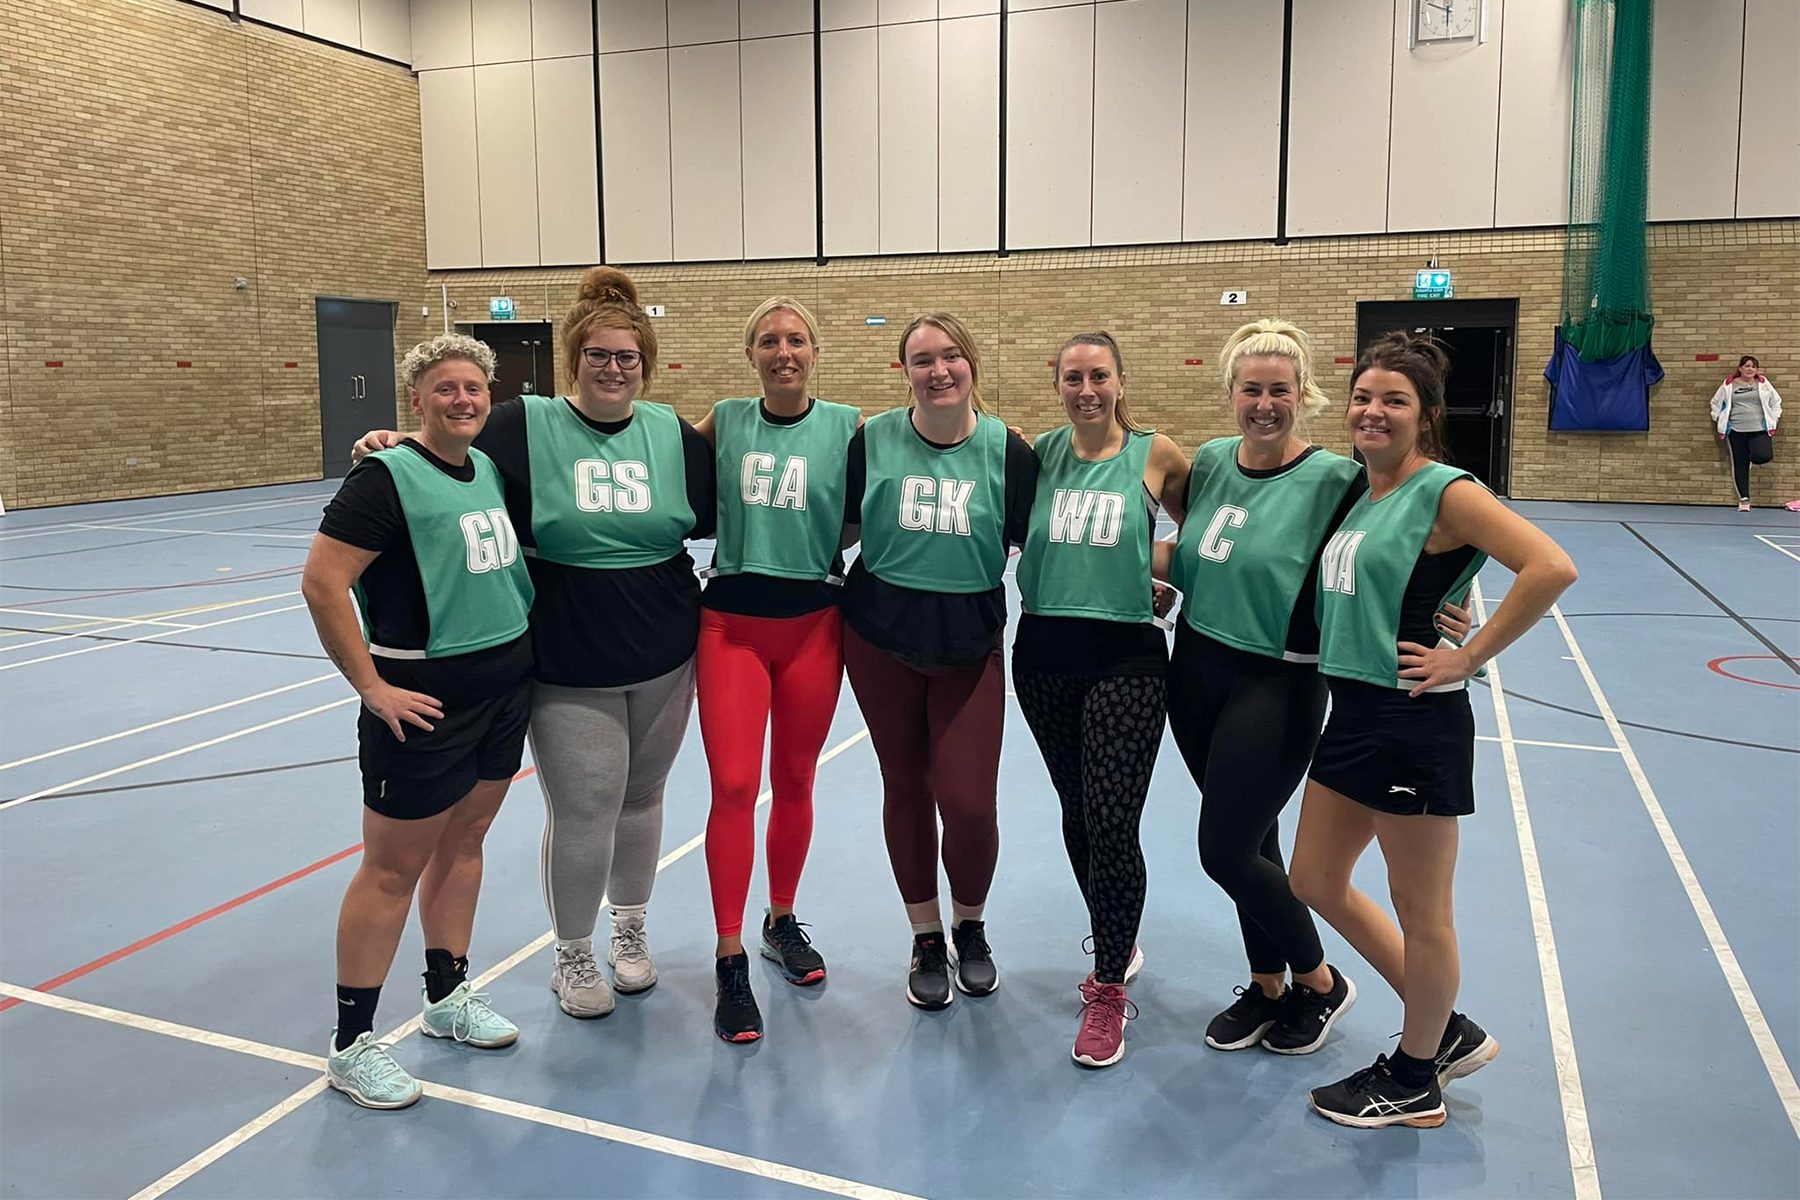 Image of a netball team in green bibs posing for a photo in a sports hall